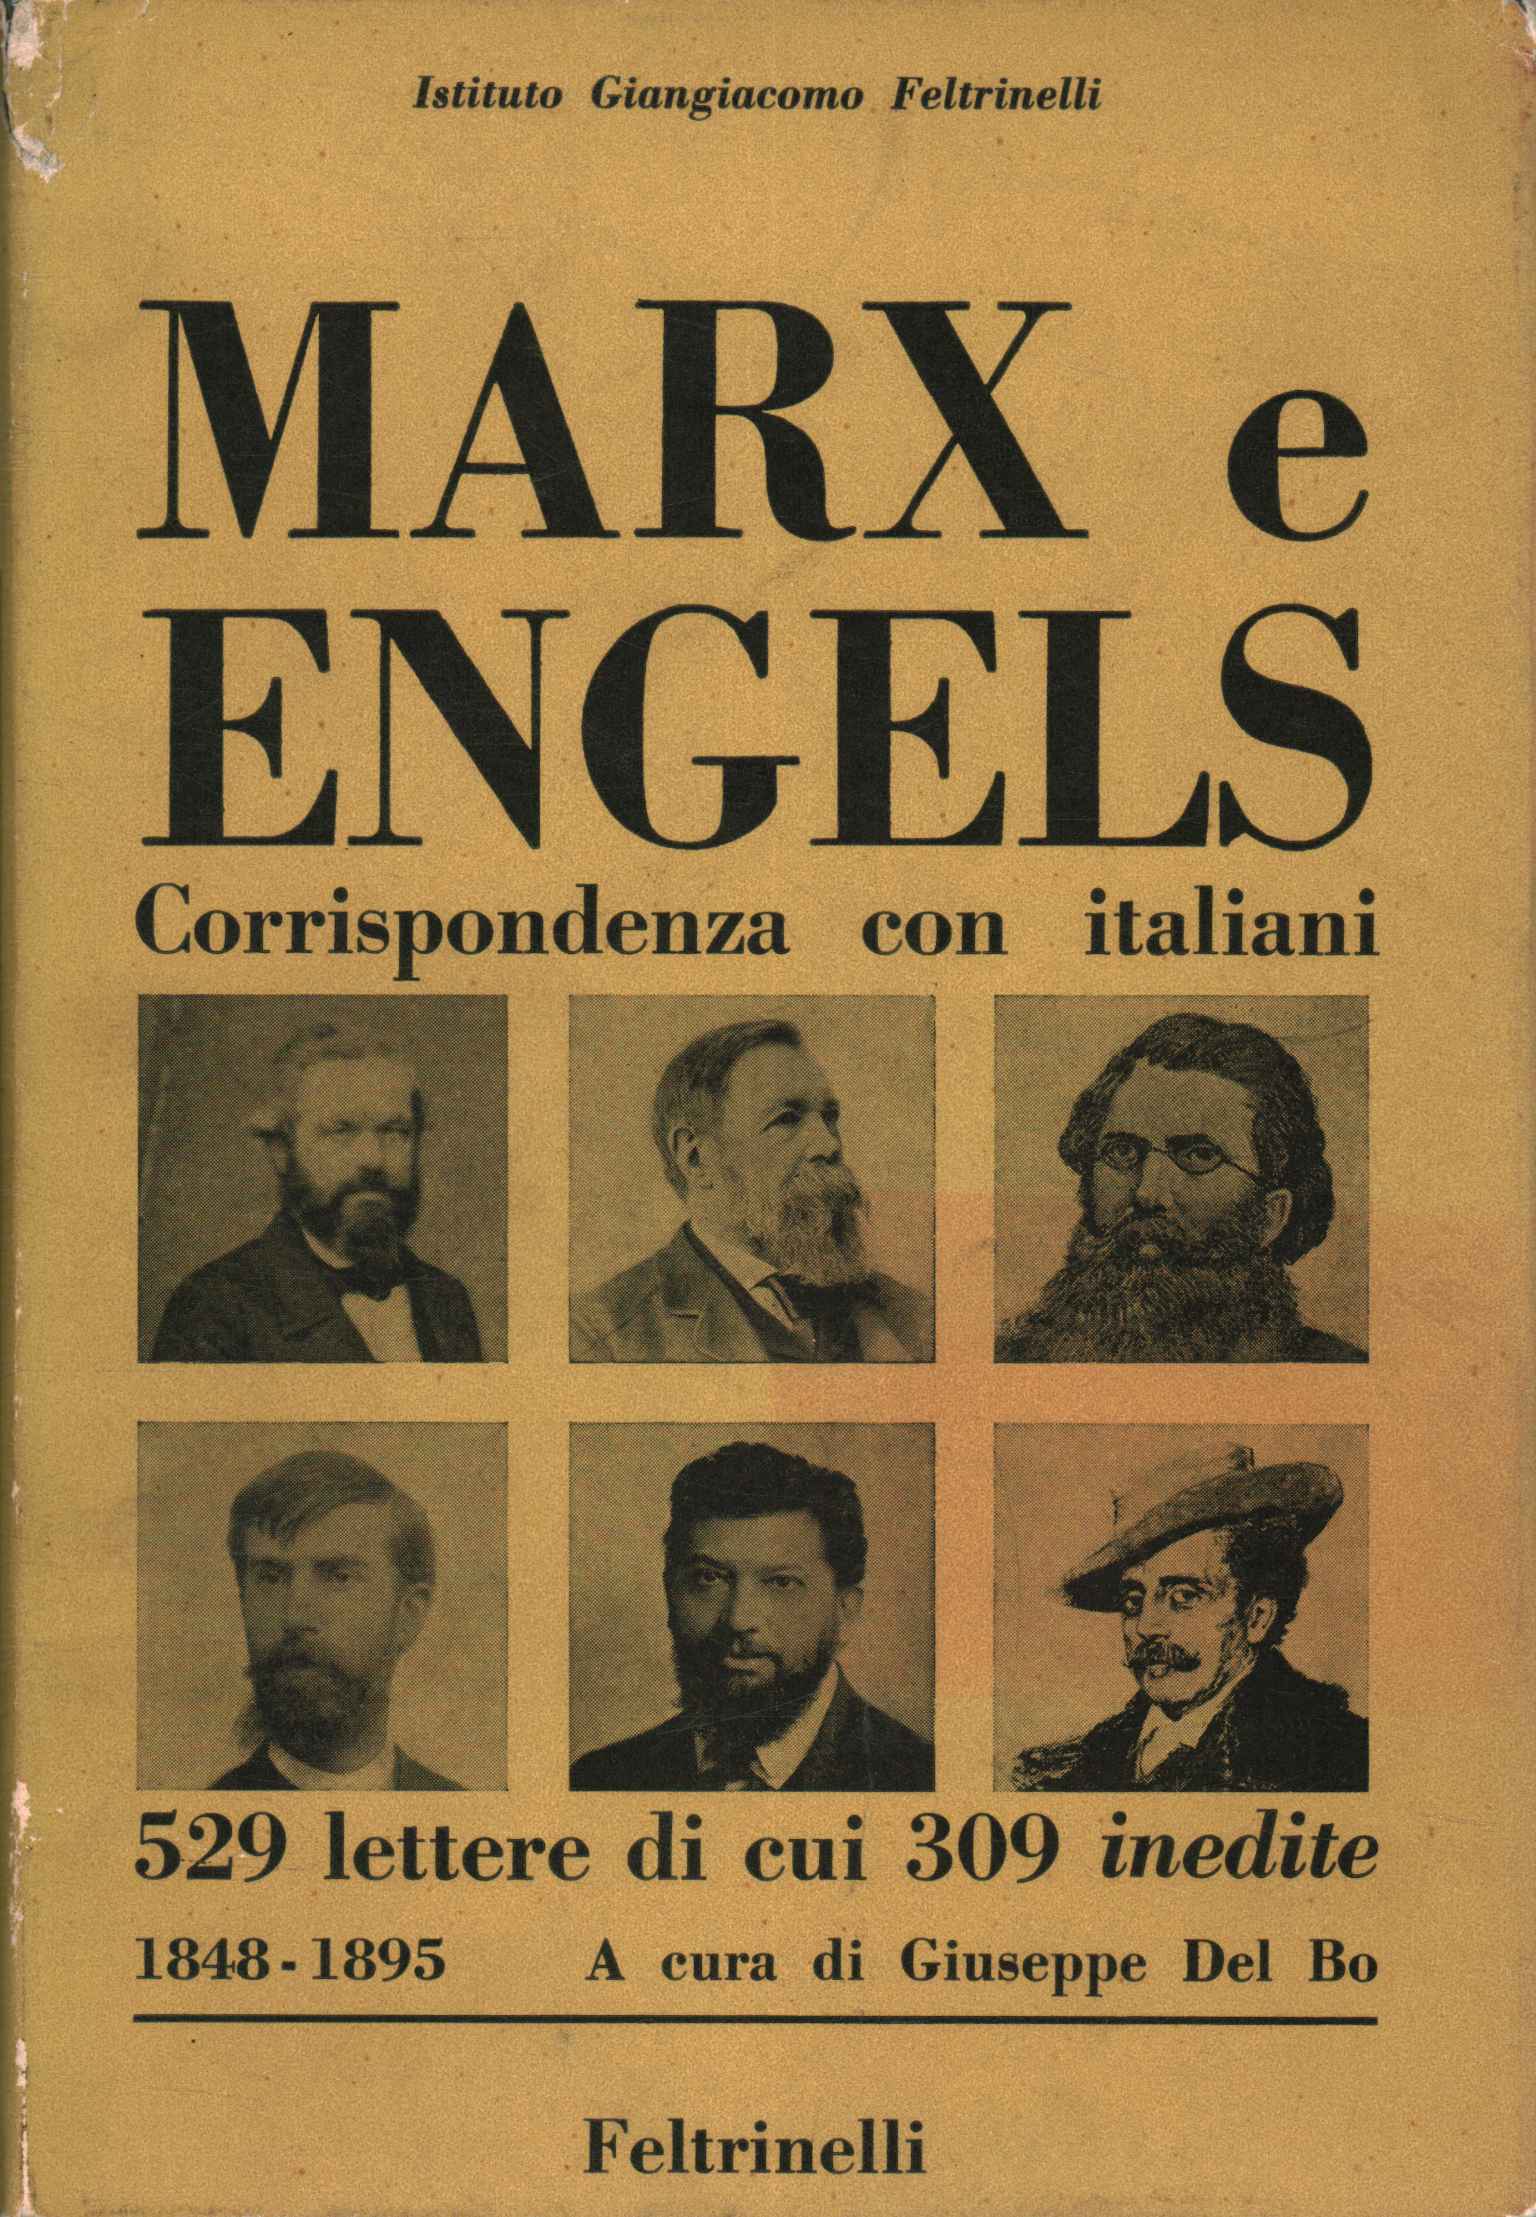 The correspondence of Marx and Engels with